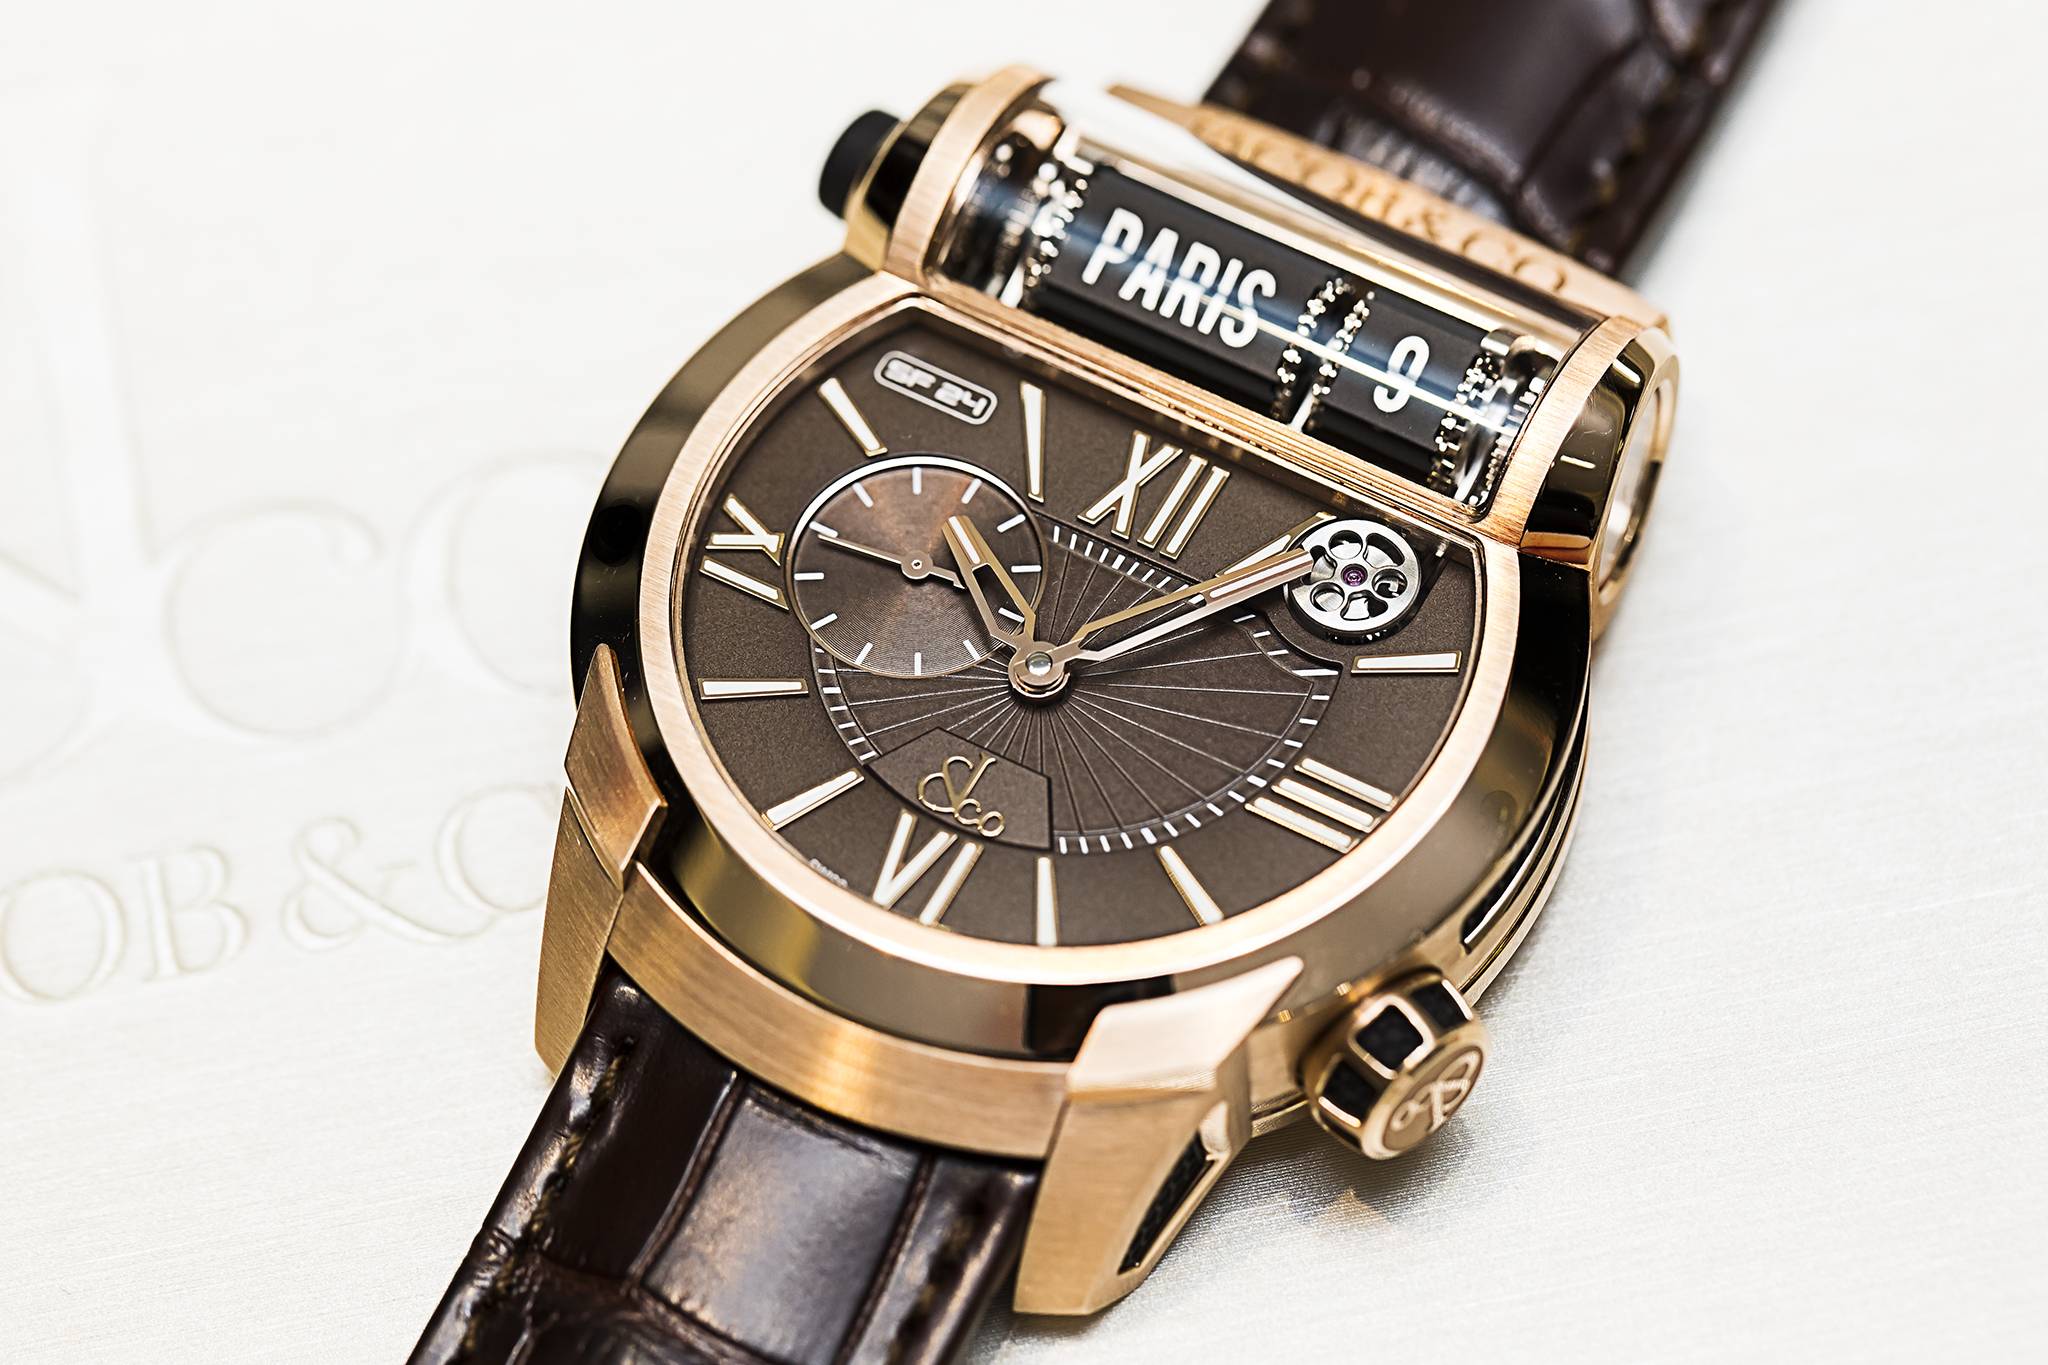 JACOB & CO. ANNUAL TIMEPIECE AND JEWELRY EXHIBITION IN MONTE CARLO